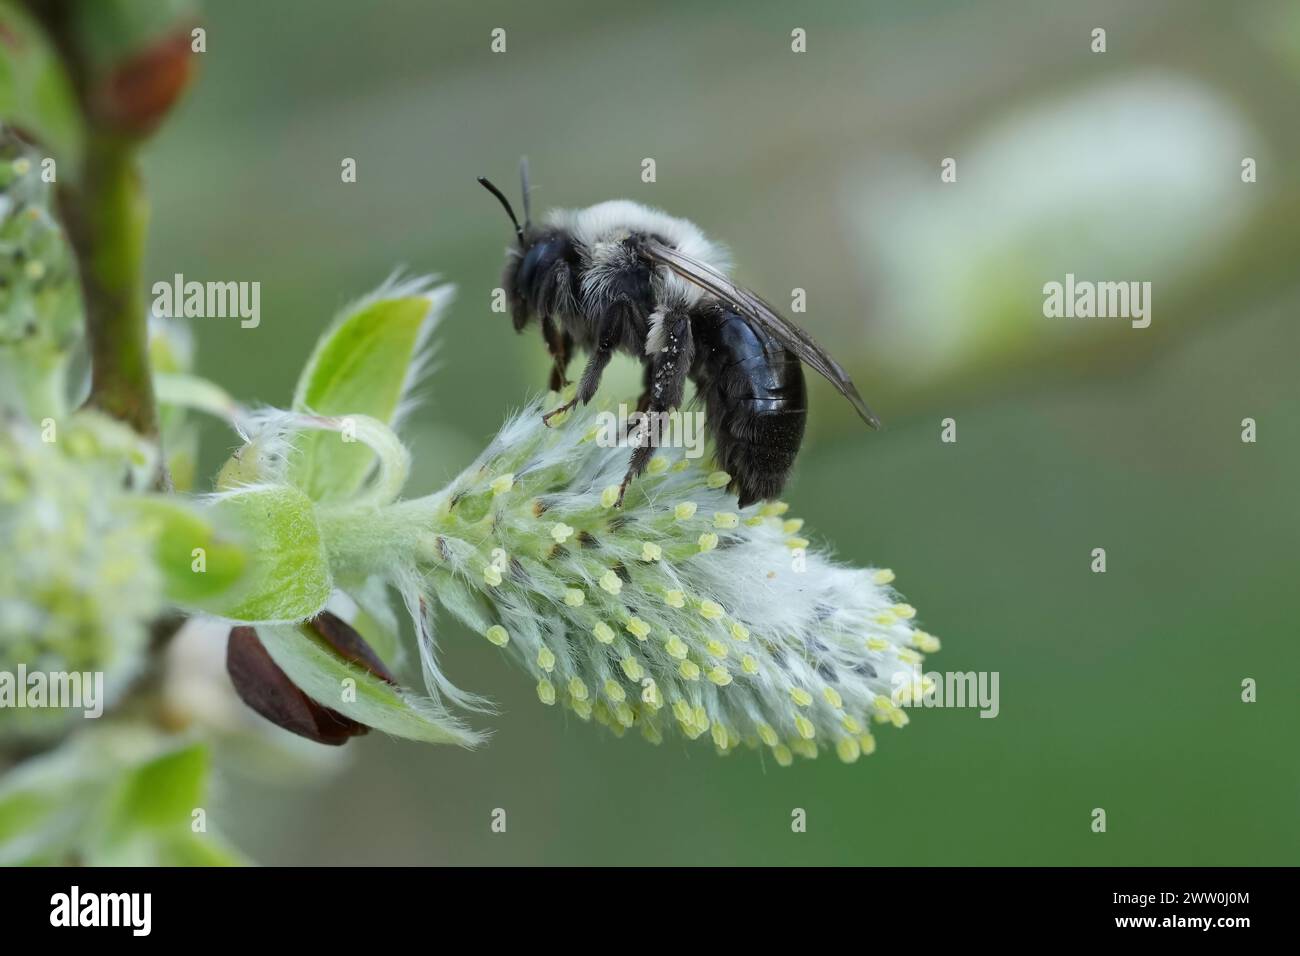 Natural closeup on a female Grey-backed mining bee, Andrena vaga, sitting on a female Goat Willow catkin Stock Photo